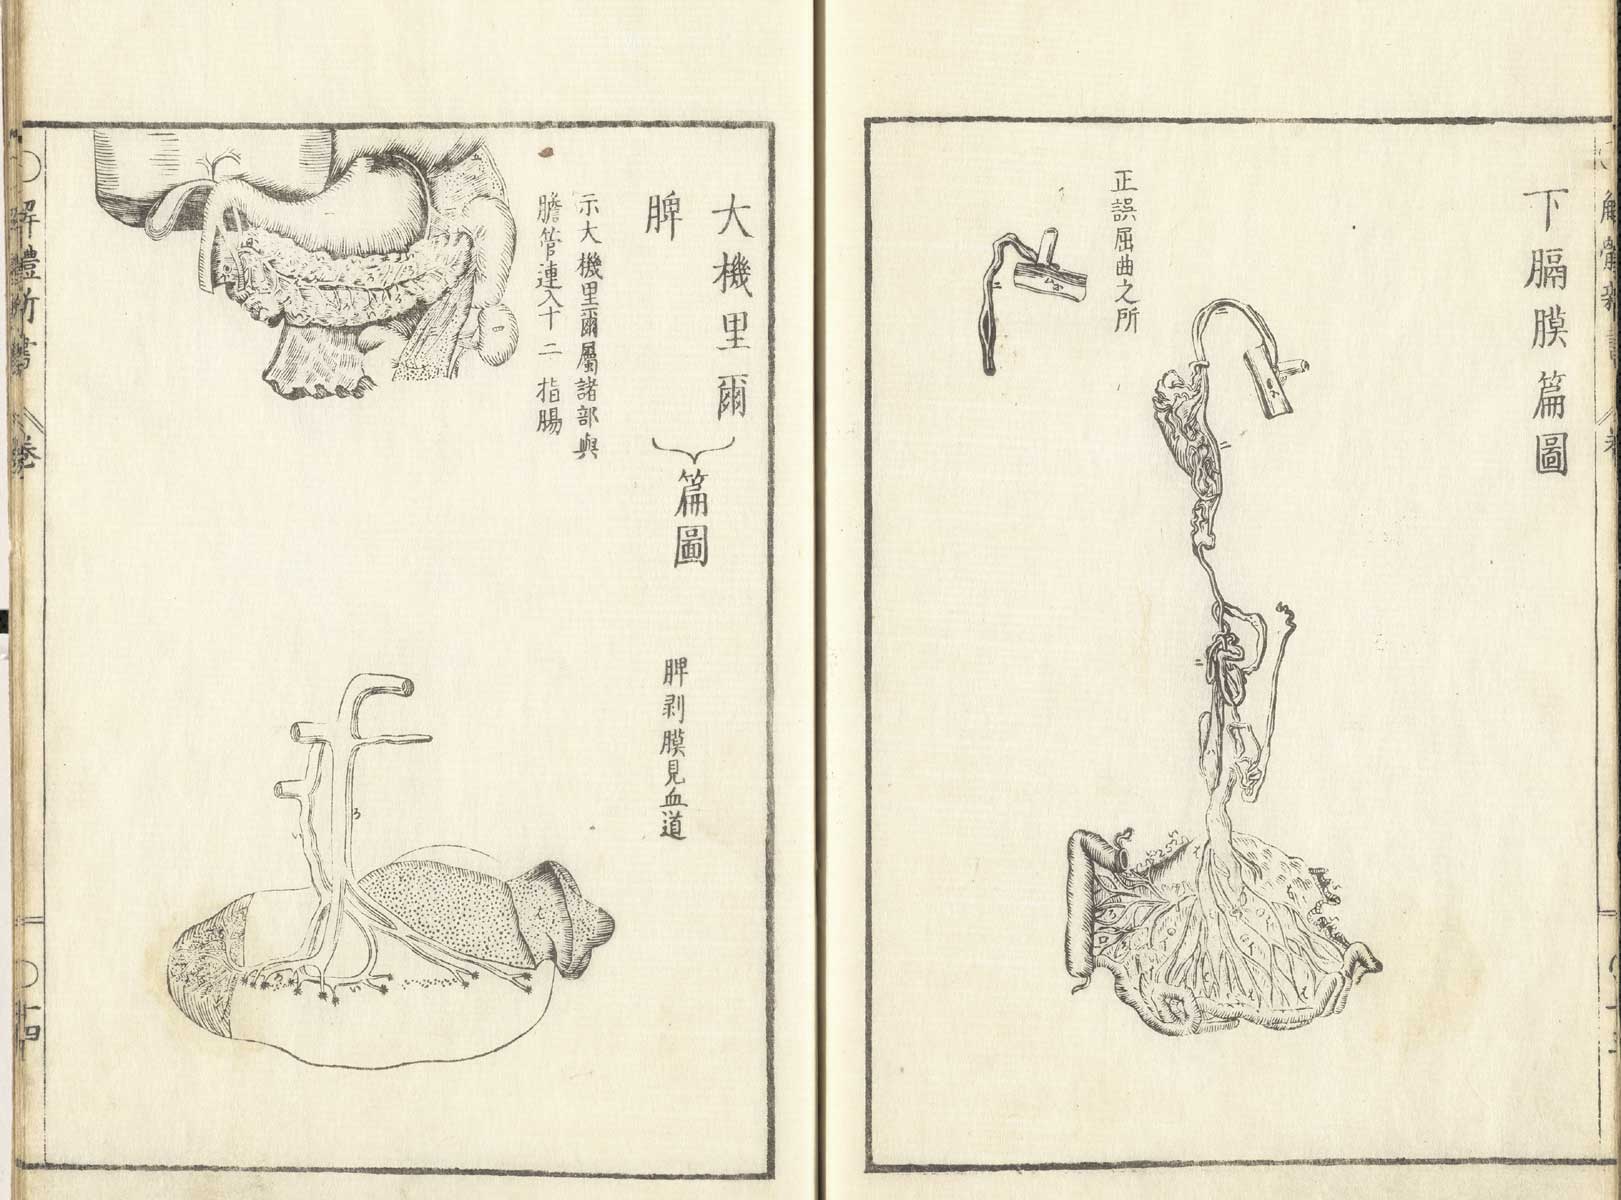 Pages 13 and 14 of Johann Adam Kulmus' Kaitai shinsho. Page 13 is an illustration of the venous system of the abdominal cavity. Page 14 are two illustrations of the abdominal cavity organs.